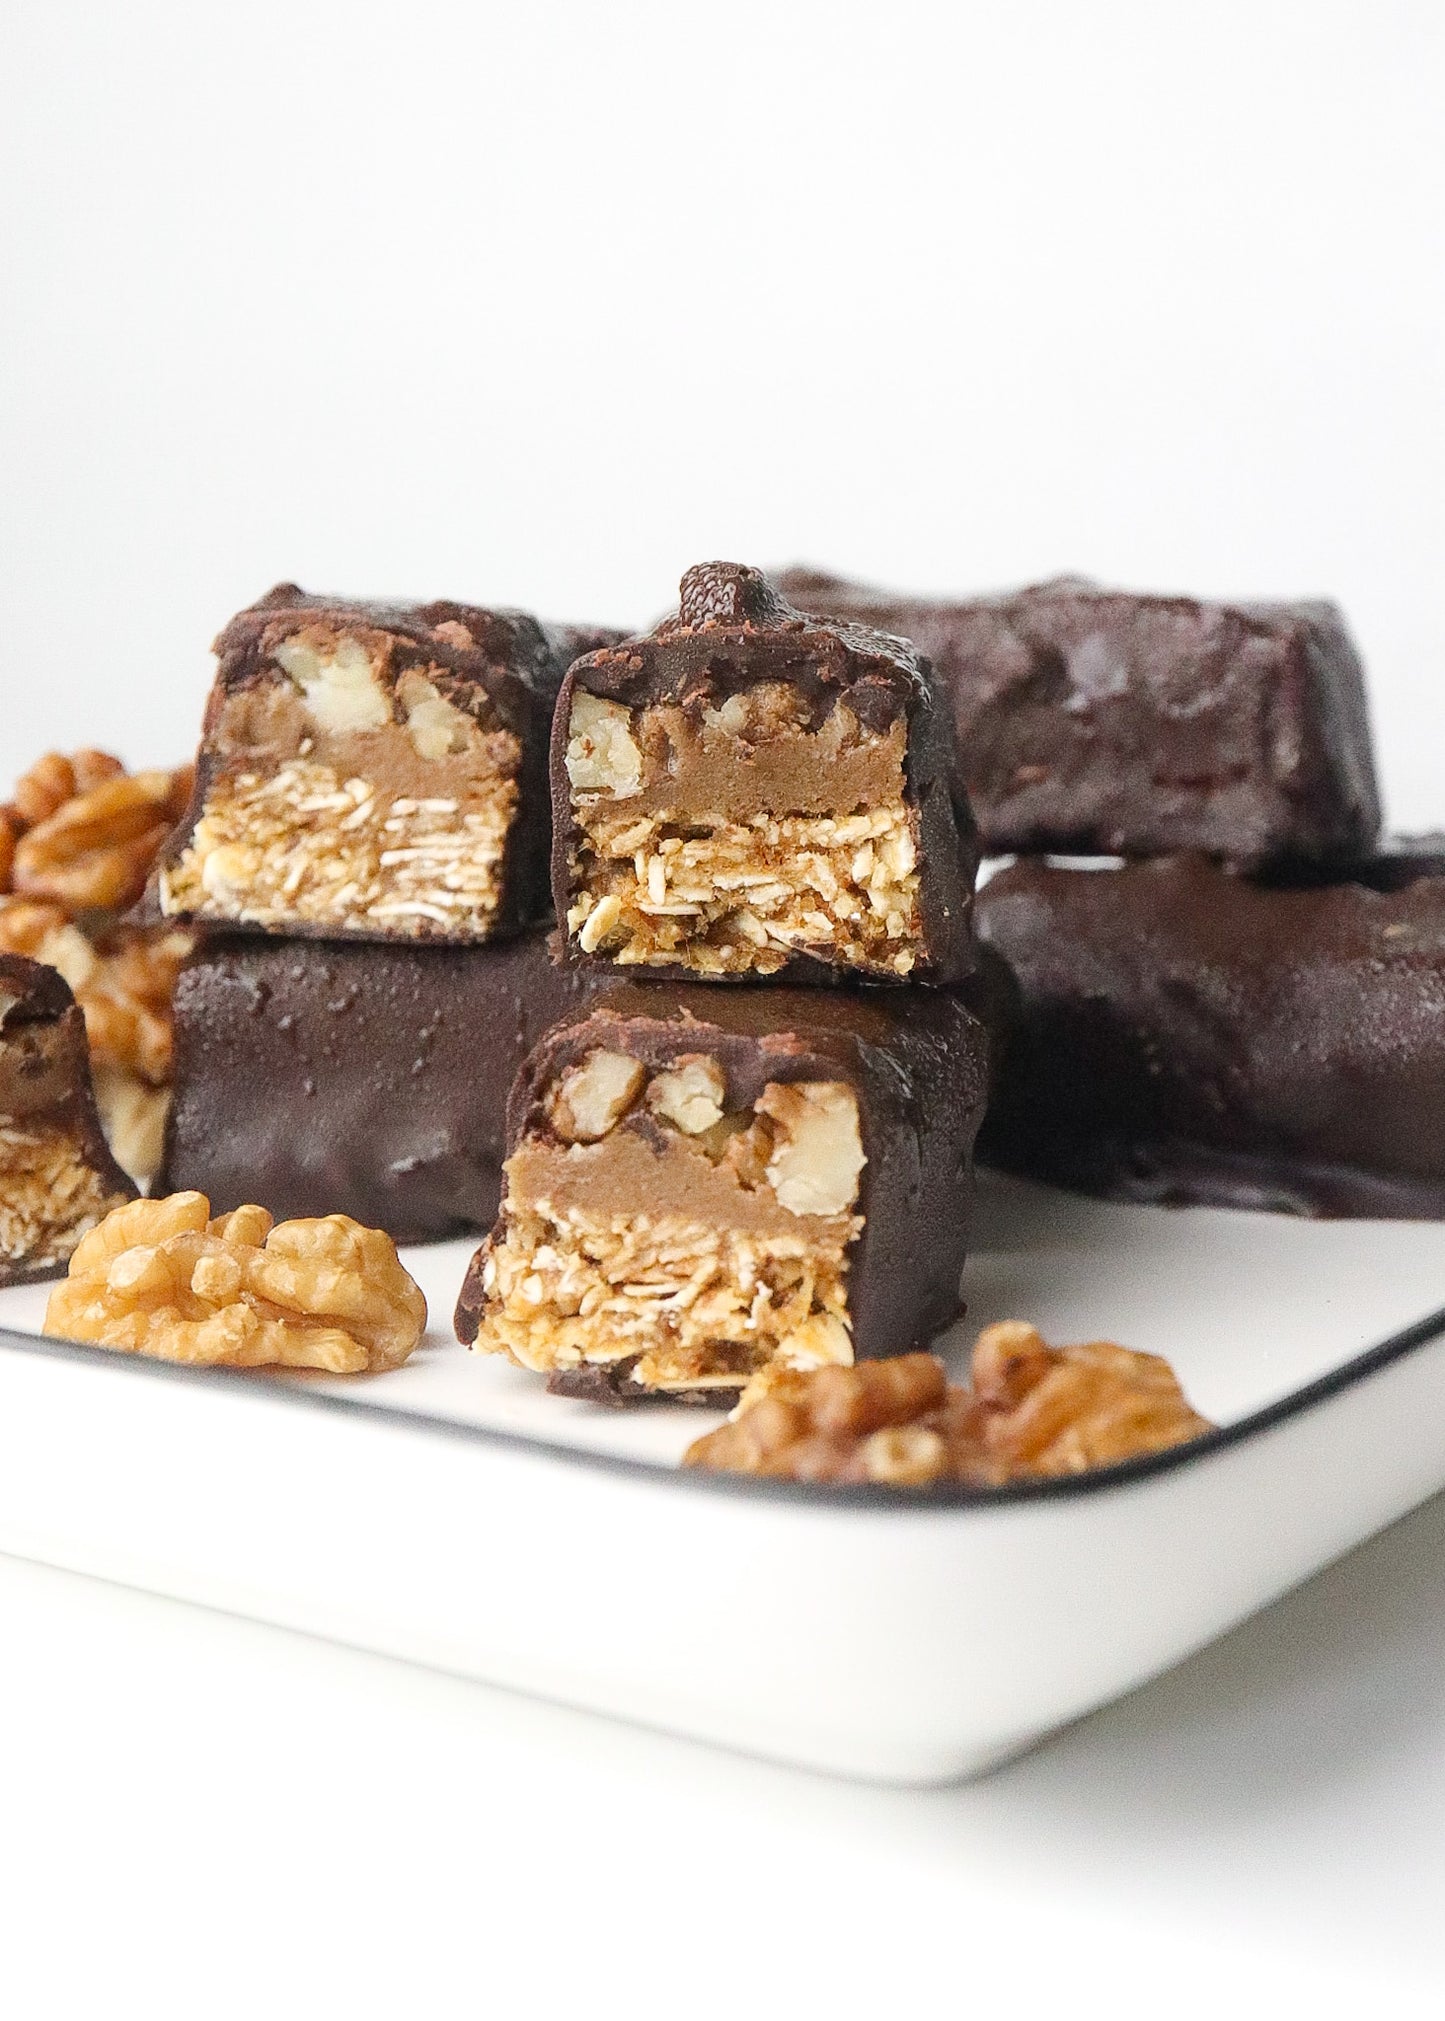 Best Seller: Walnut Chocolate Protein Bars - 65 grams (5 Pieces)